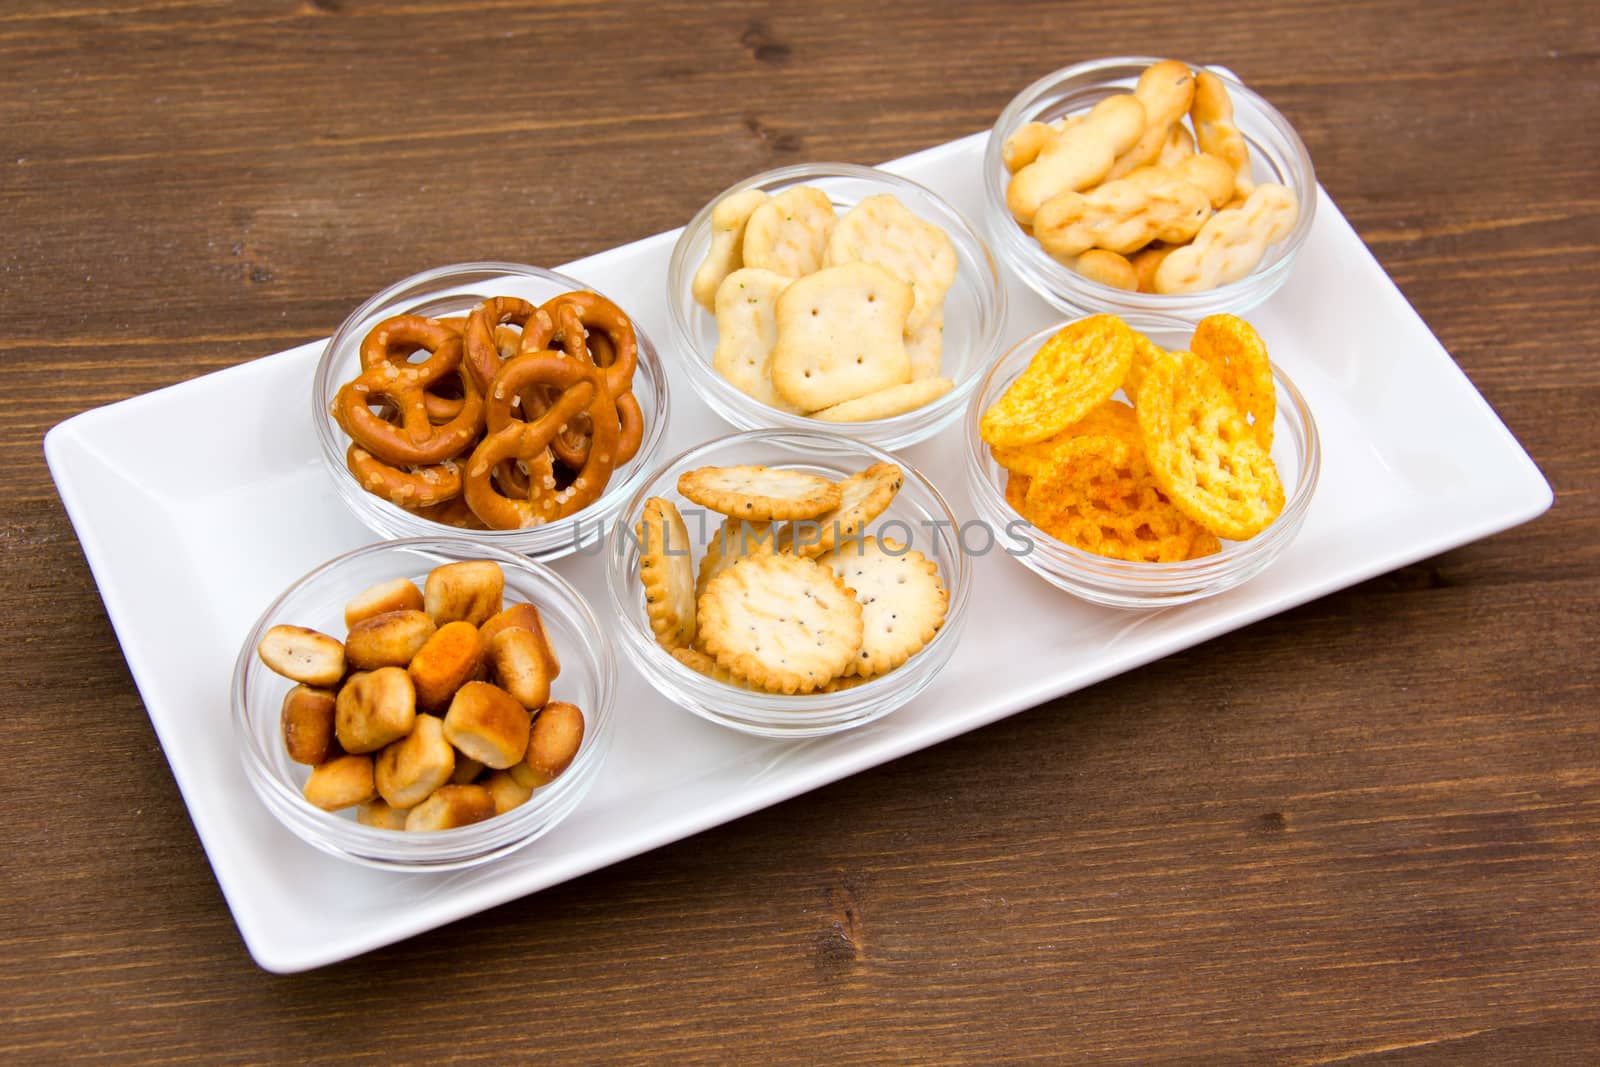 Bowls of pretzels on tray seen from above on wooden table